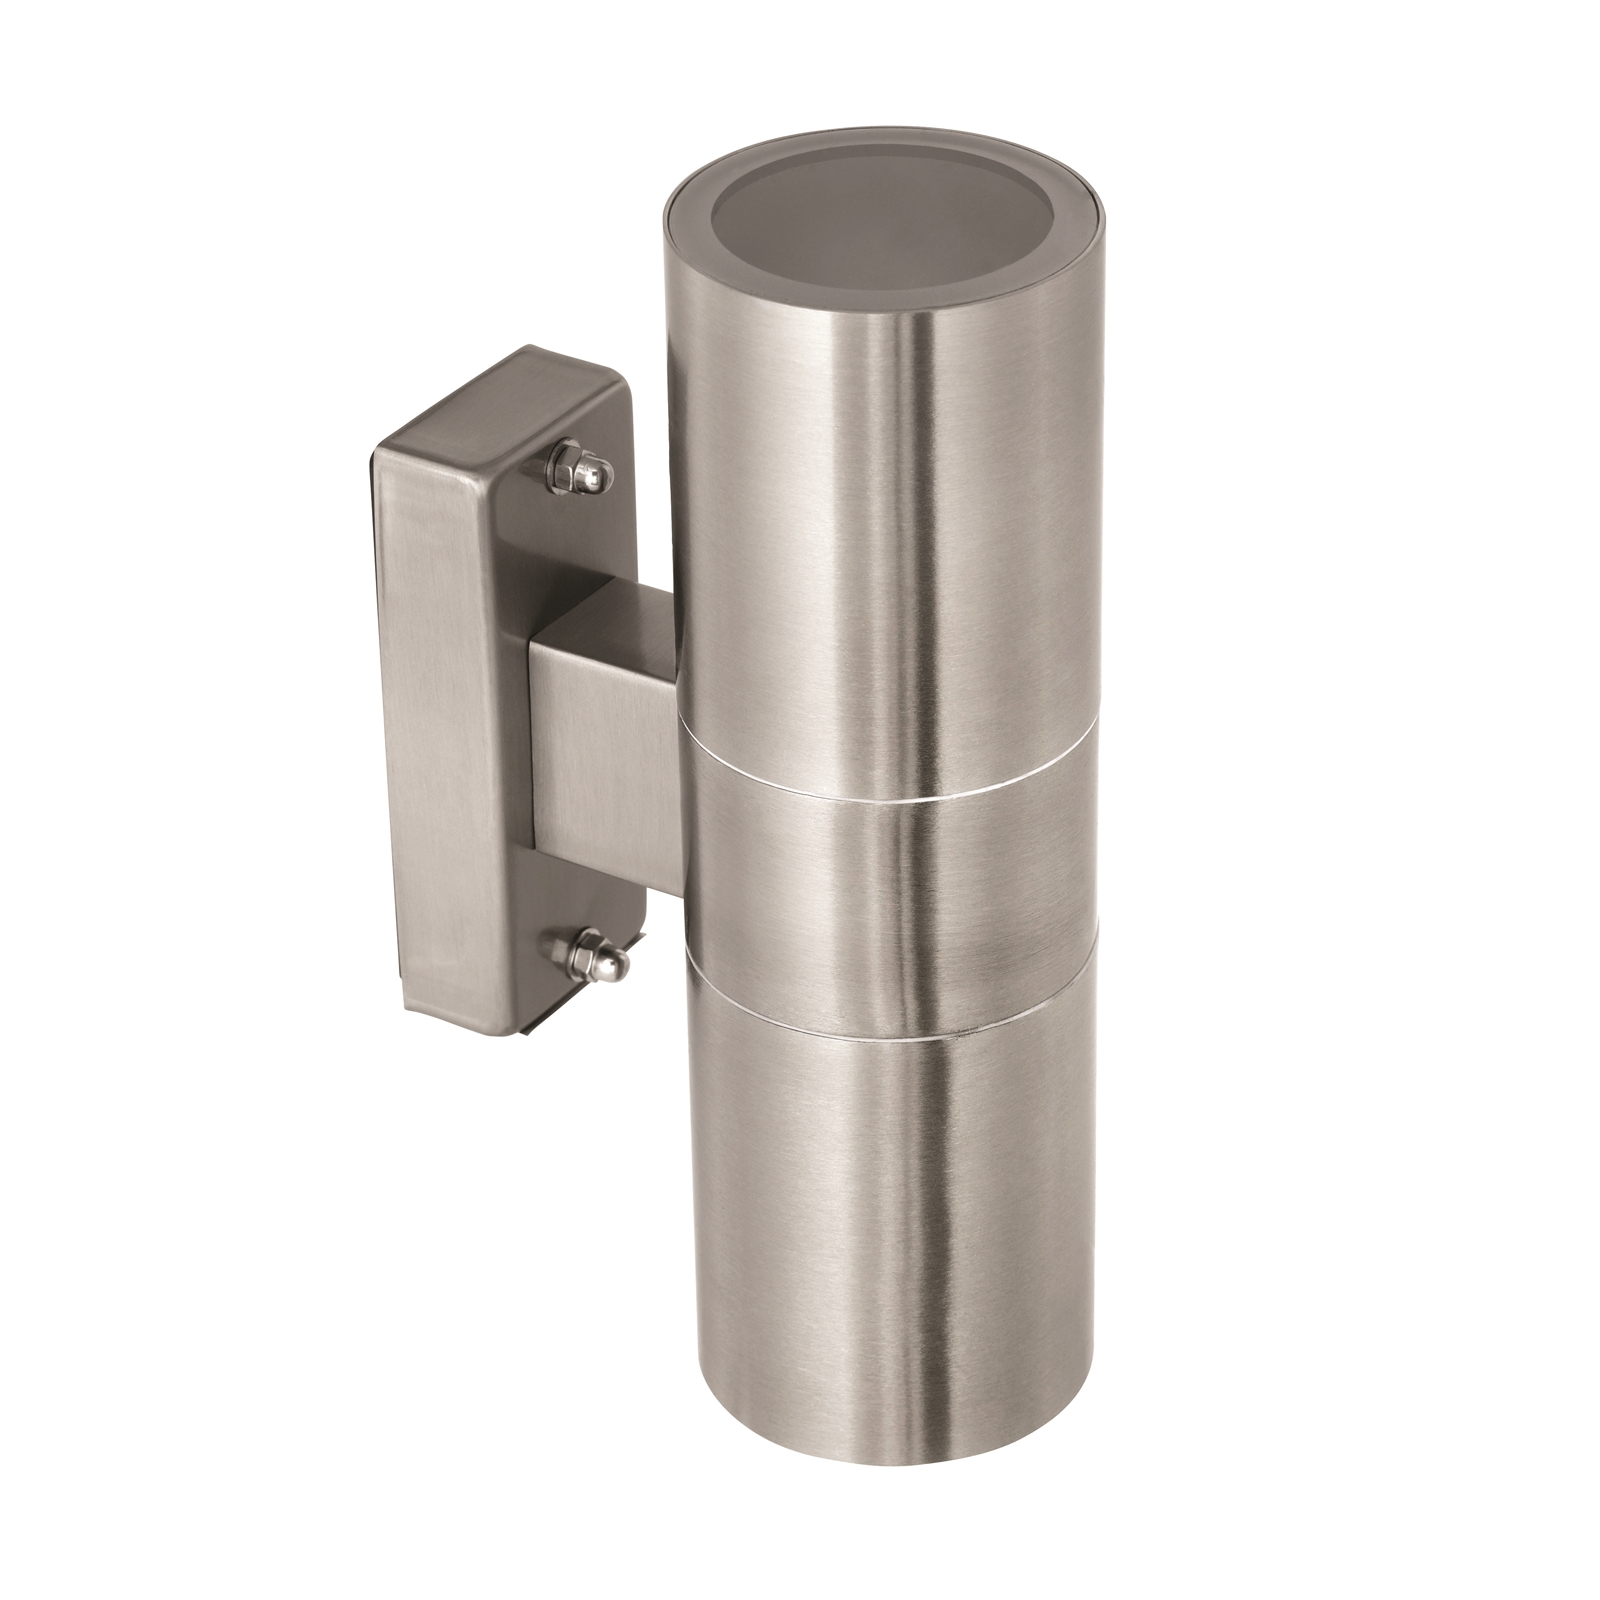 Brilliant 35W Stainless Steel Coolum Up Down Exterior Wall Light